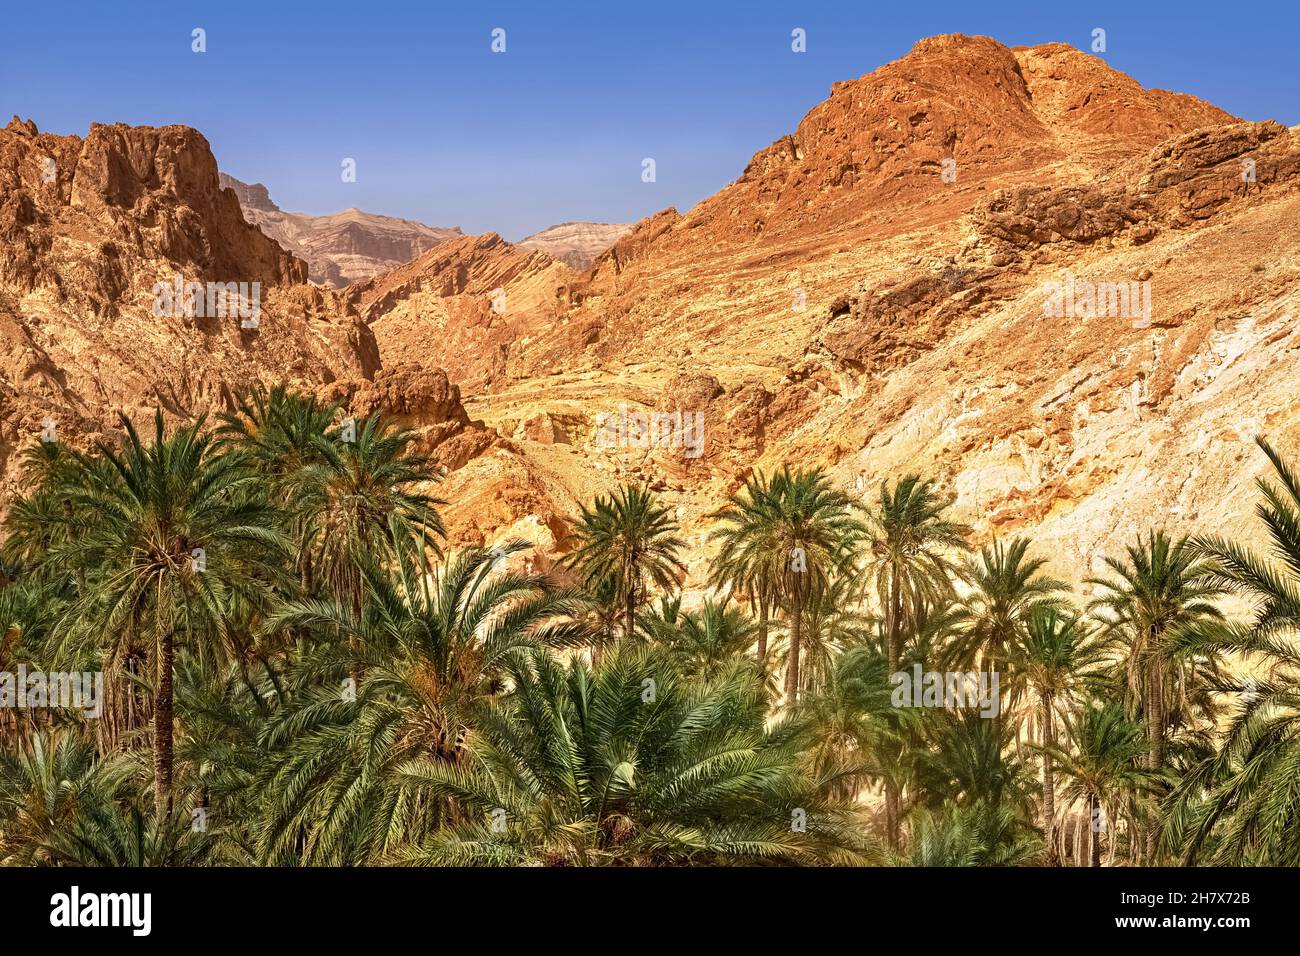 View of the mountain oasis of Shebika, in the middle of the Sahara Desert, Tunisia Stock Photo